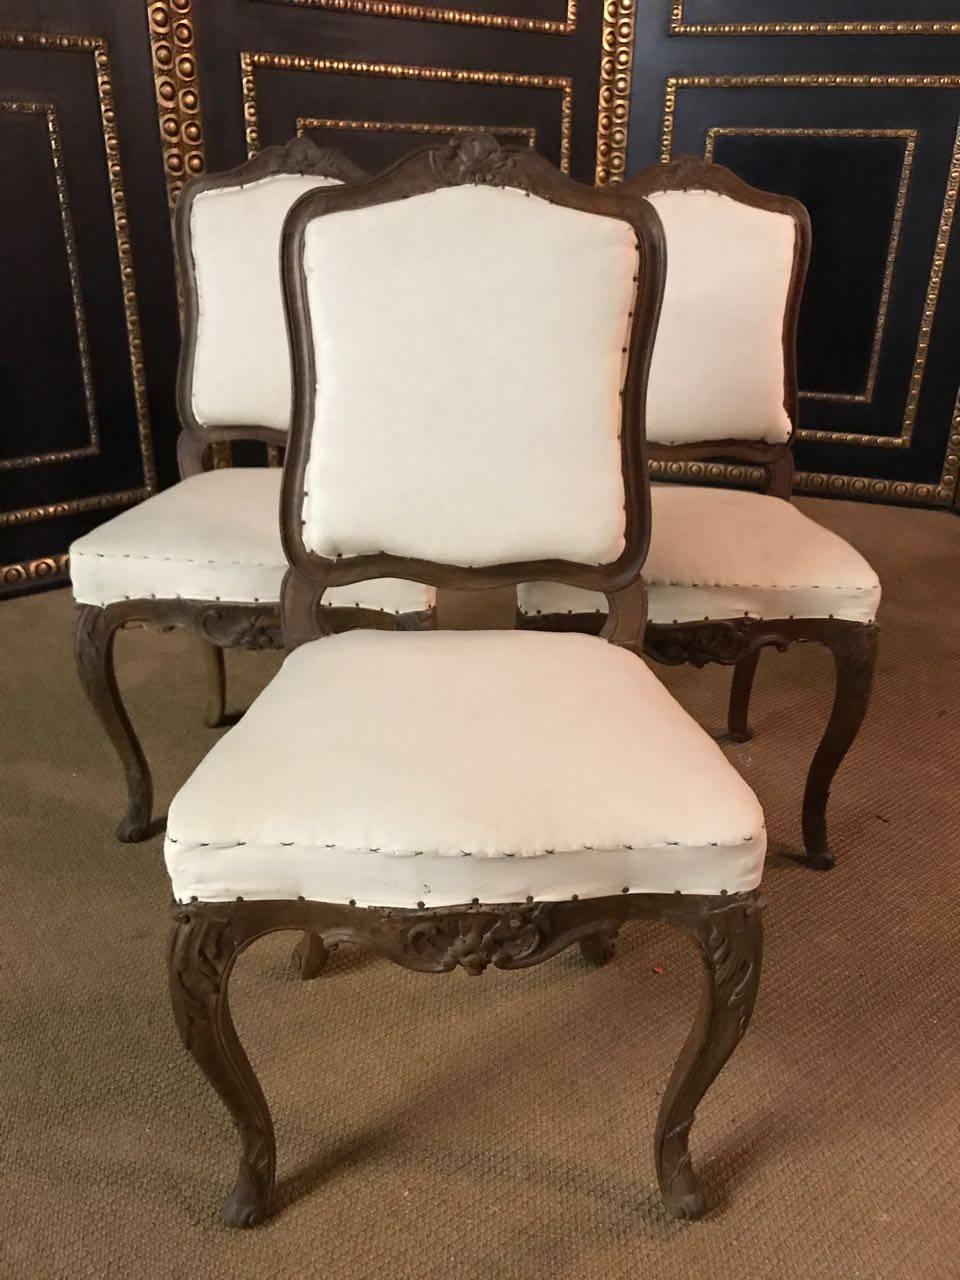 Three original museum Baroque walnut chairs, circa 1740

Solid walnut. On the curled legs, strongly cambered frame. Curved, medial-shaped backrest. Seat and backrest from the ground up newly upholstered in Classic design and with laced spring base.